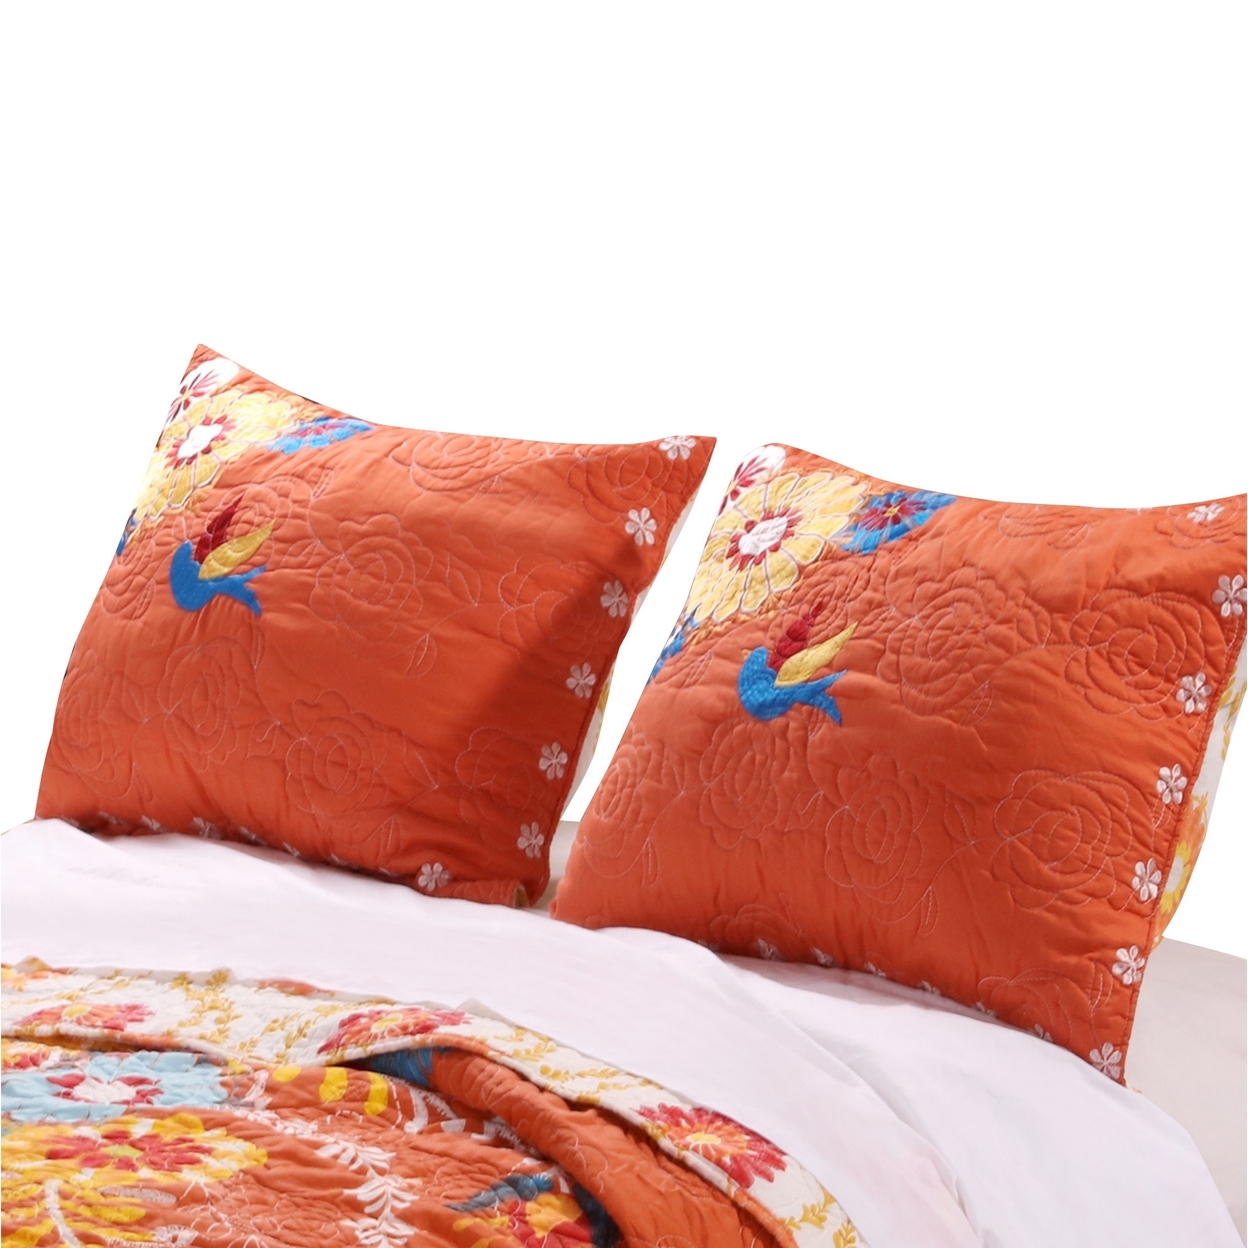 36 Inch Quilted King Pillow Sham, Cotton Rich Fill, Multicolor Embroidery-Saltoro Sherpi